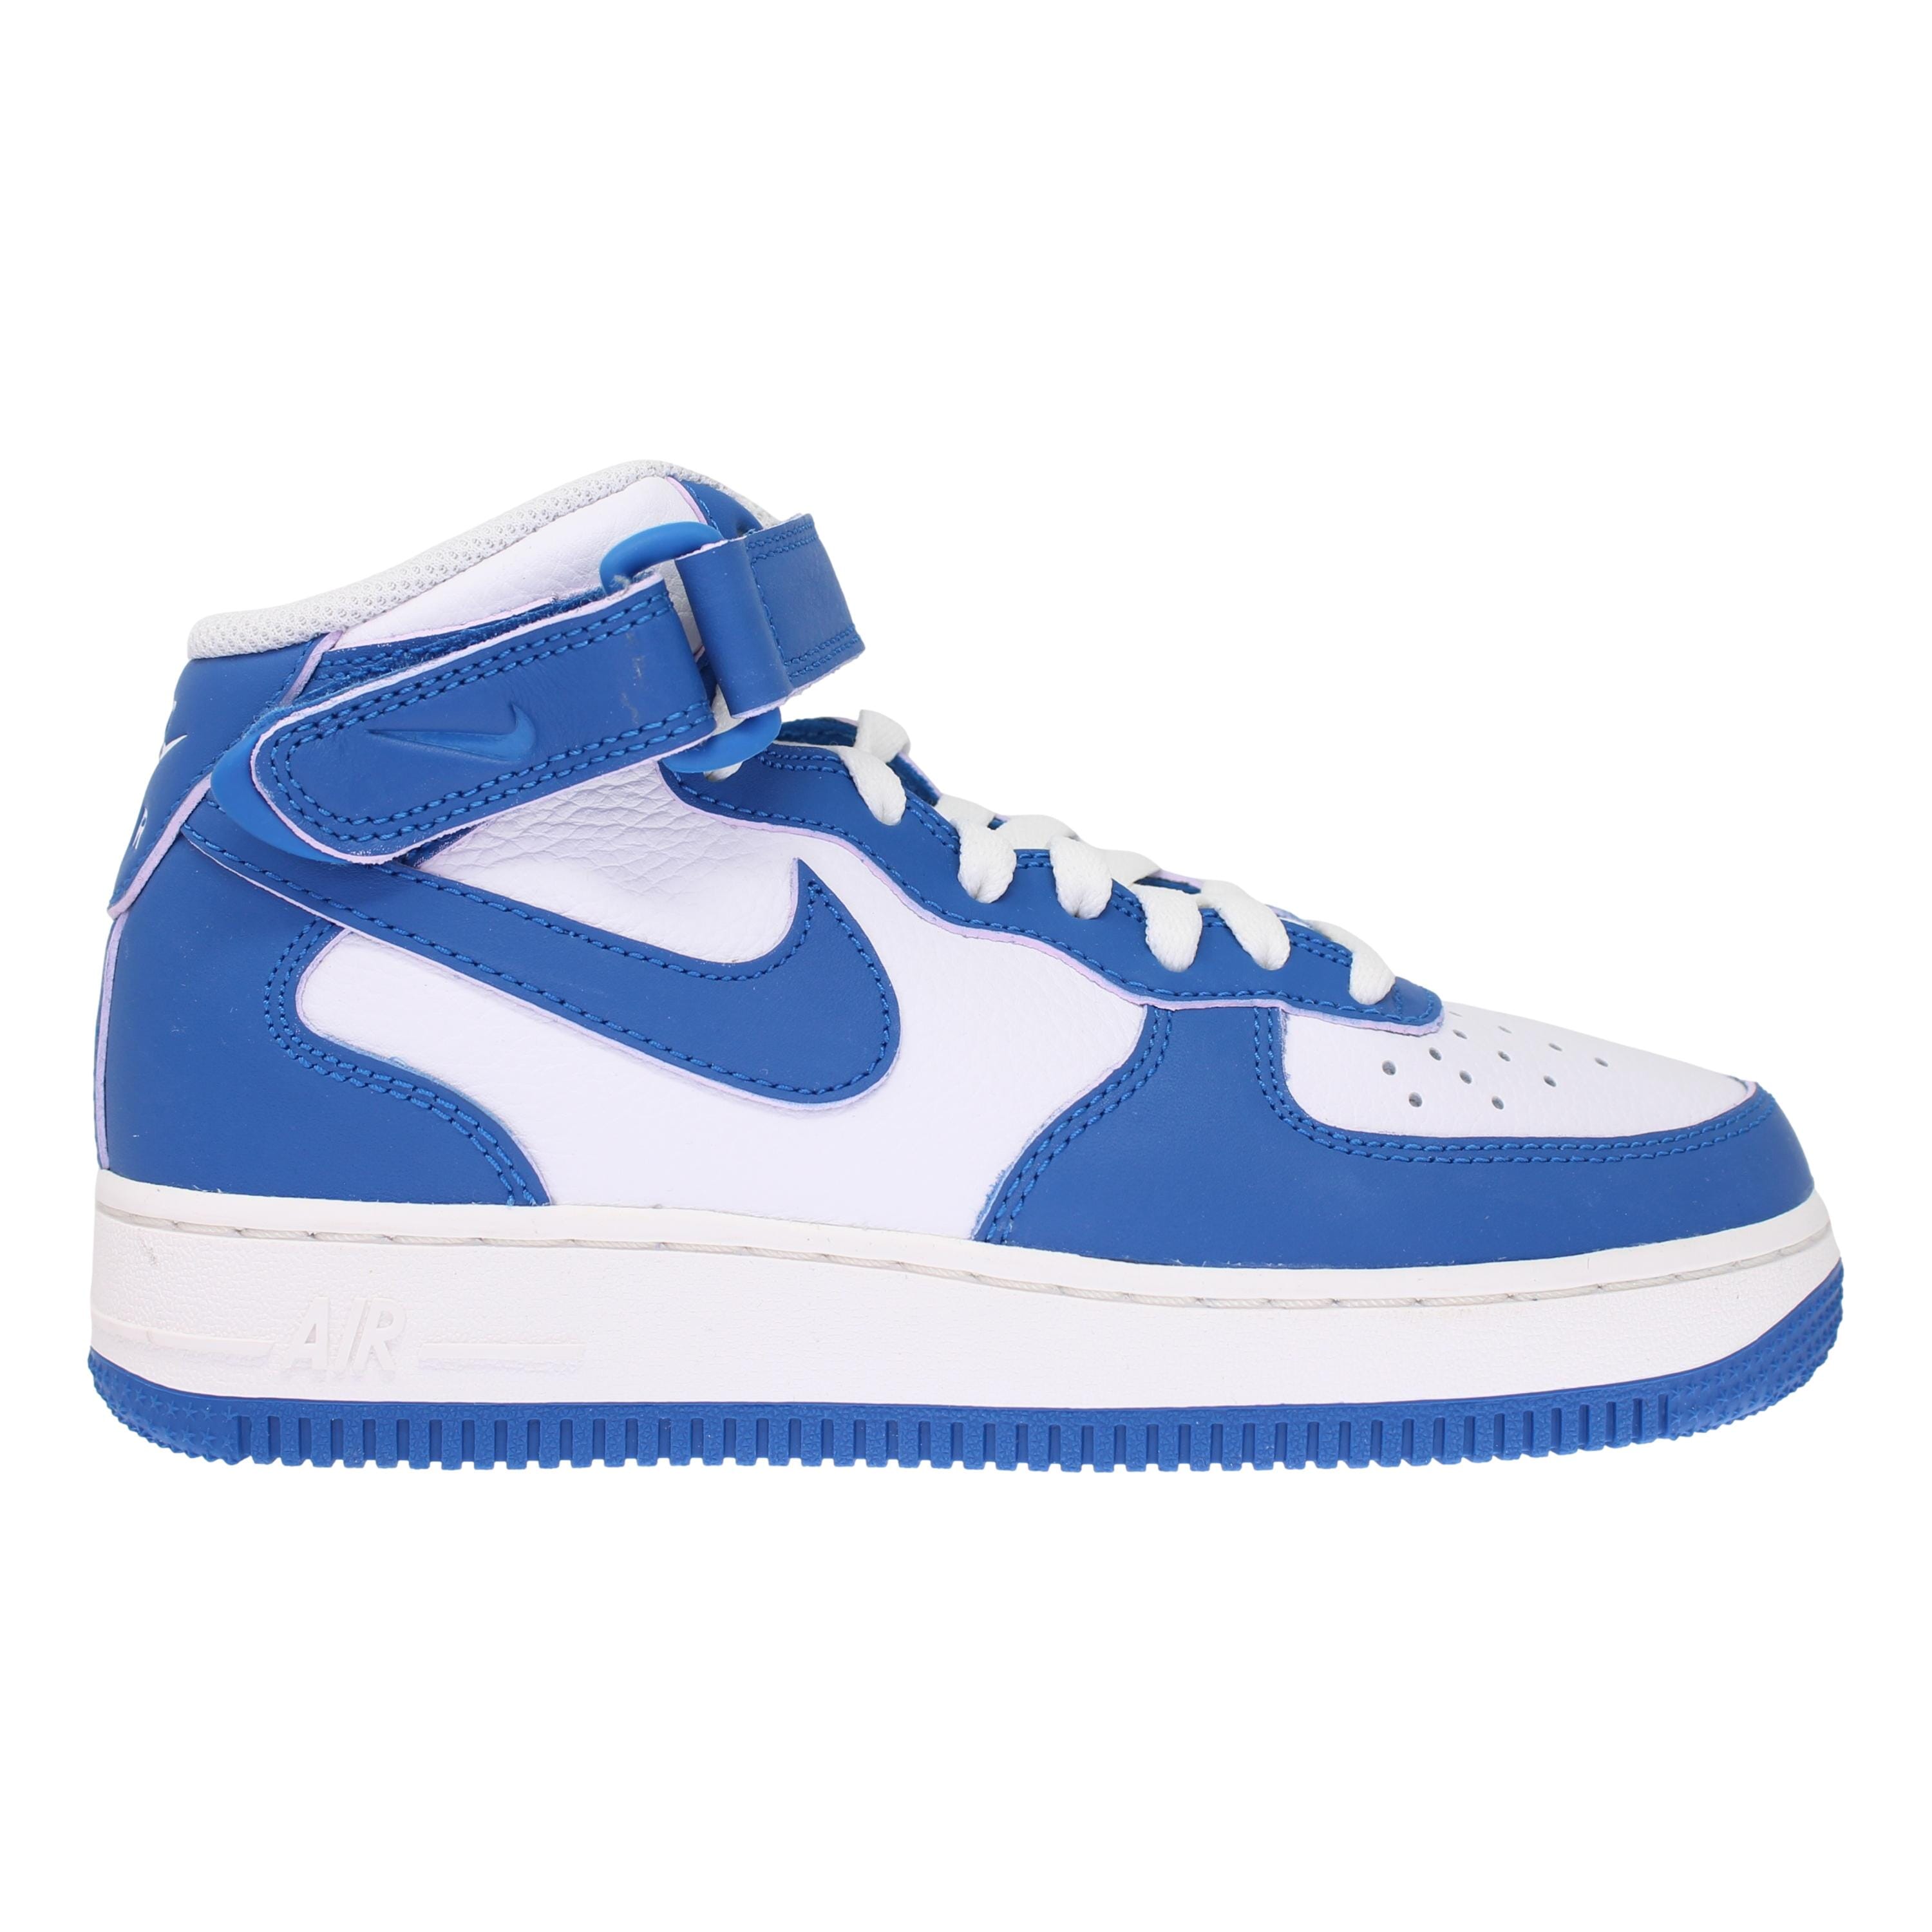 Nike Air Force 1 '07 Mid White/Military Blue-Sail-Doll  DX3721-100 Women's - blue - Size: US 6